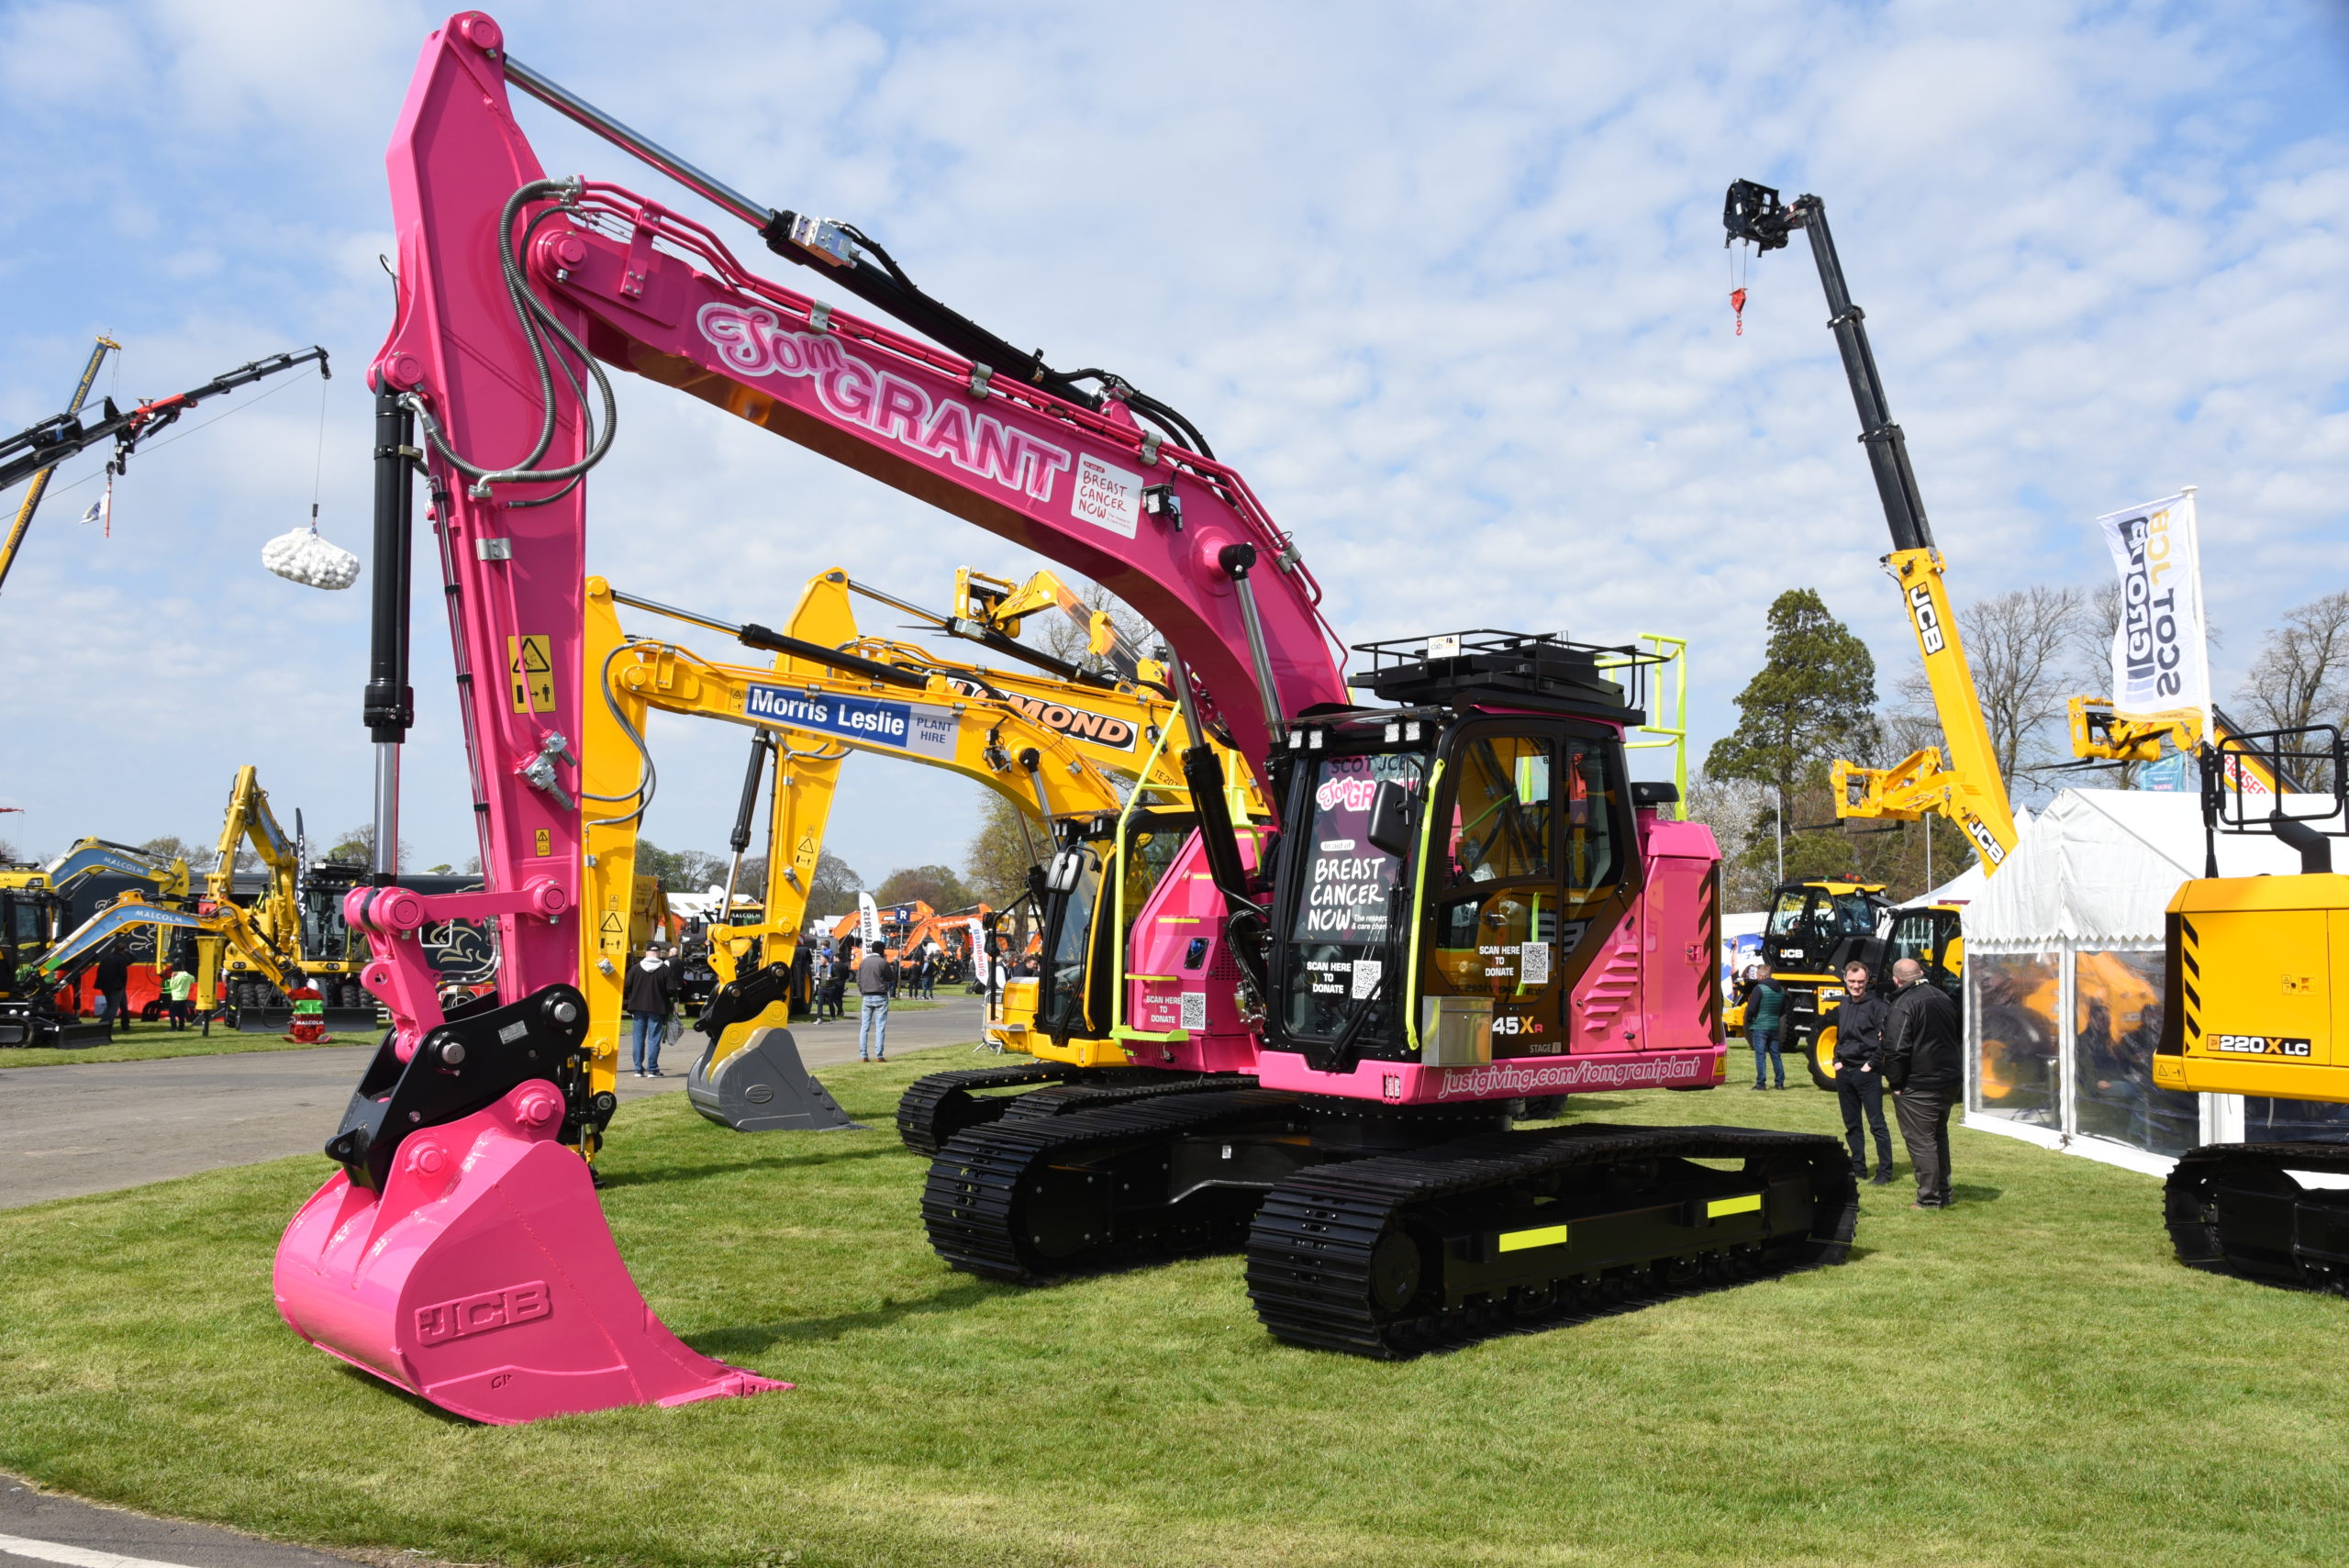 Scot JCB helps raise money for breast cancer charity at ScotPlant 2022